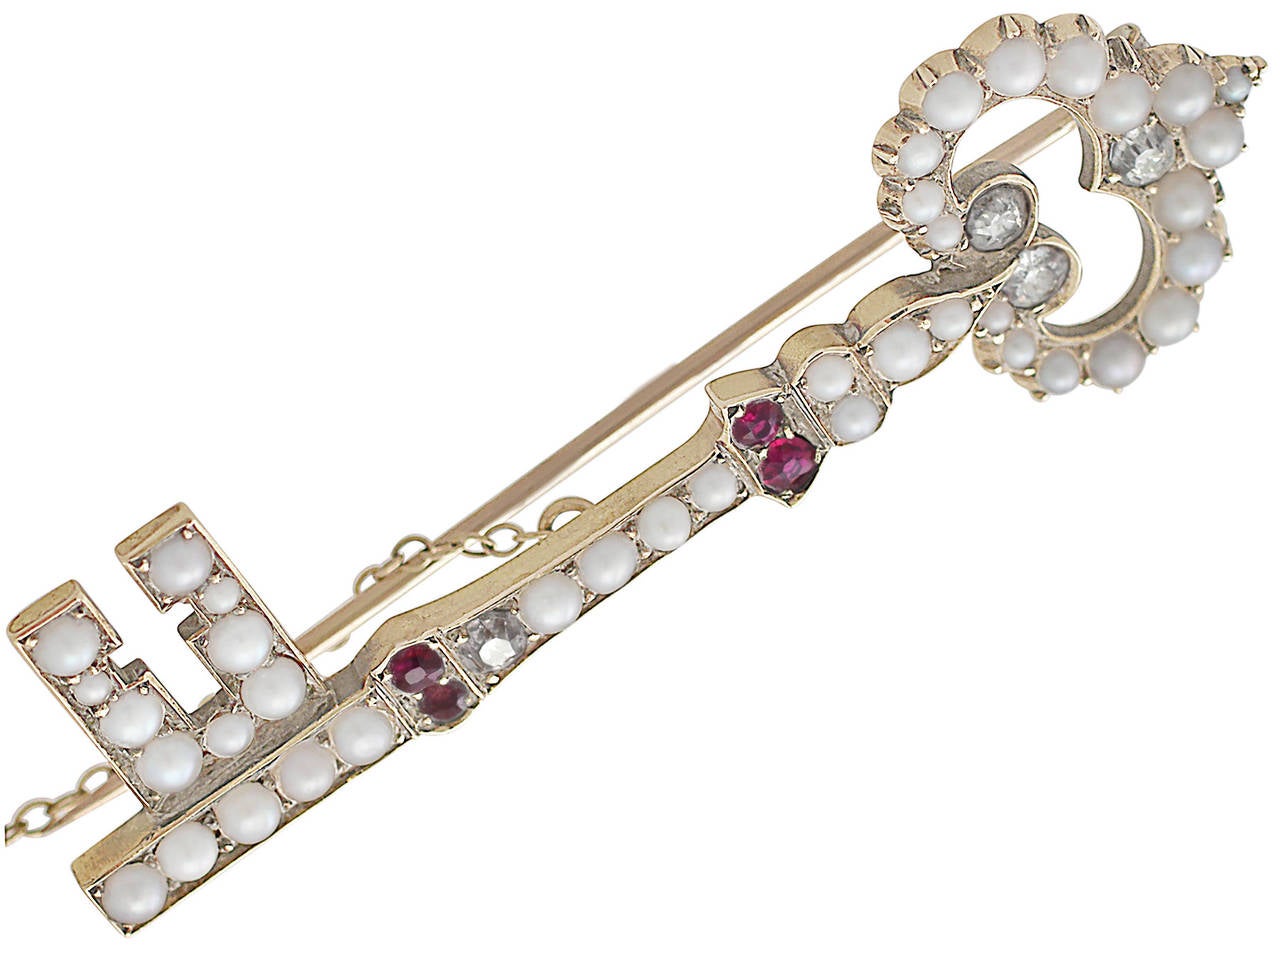 Women's 0.32Ct Diamond, Pearl and Ruby 18k Yellow Gold Key Brooch, Antique Victorian